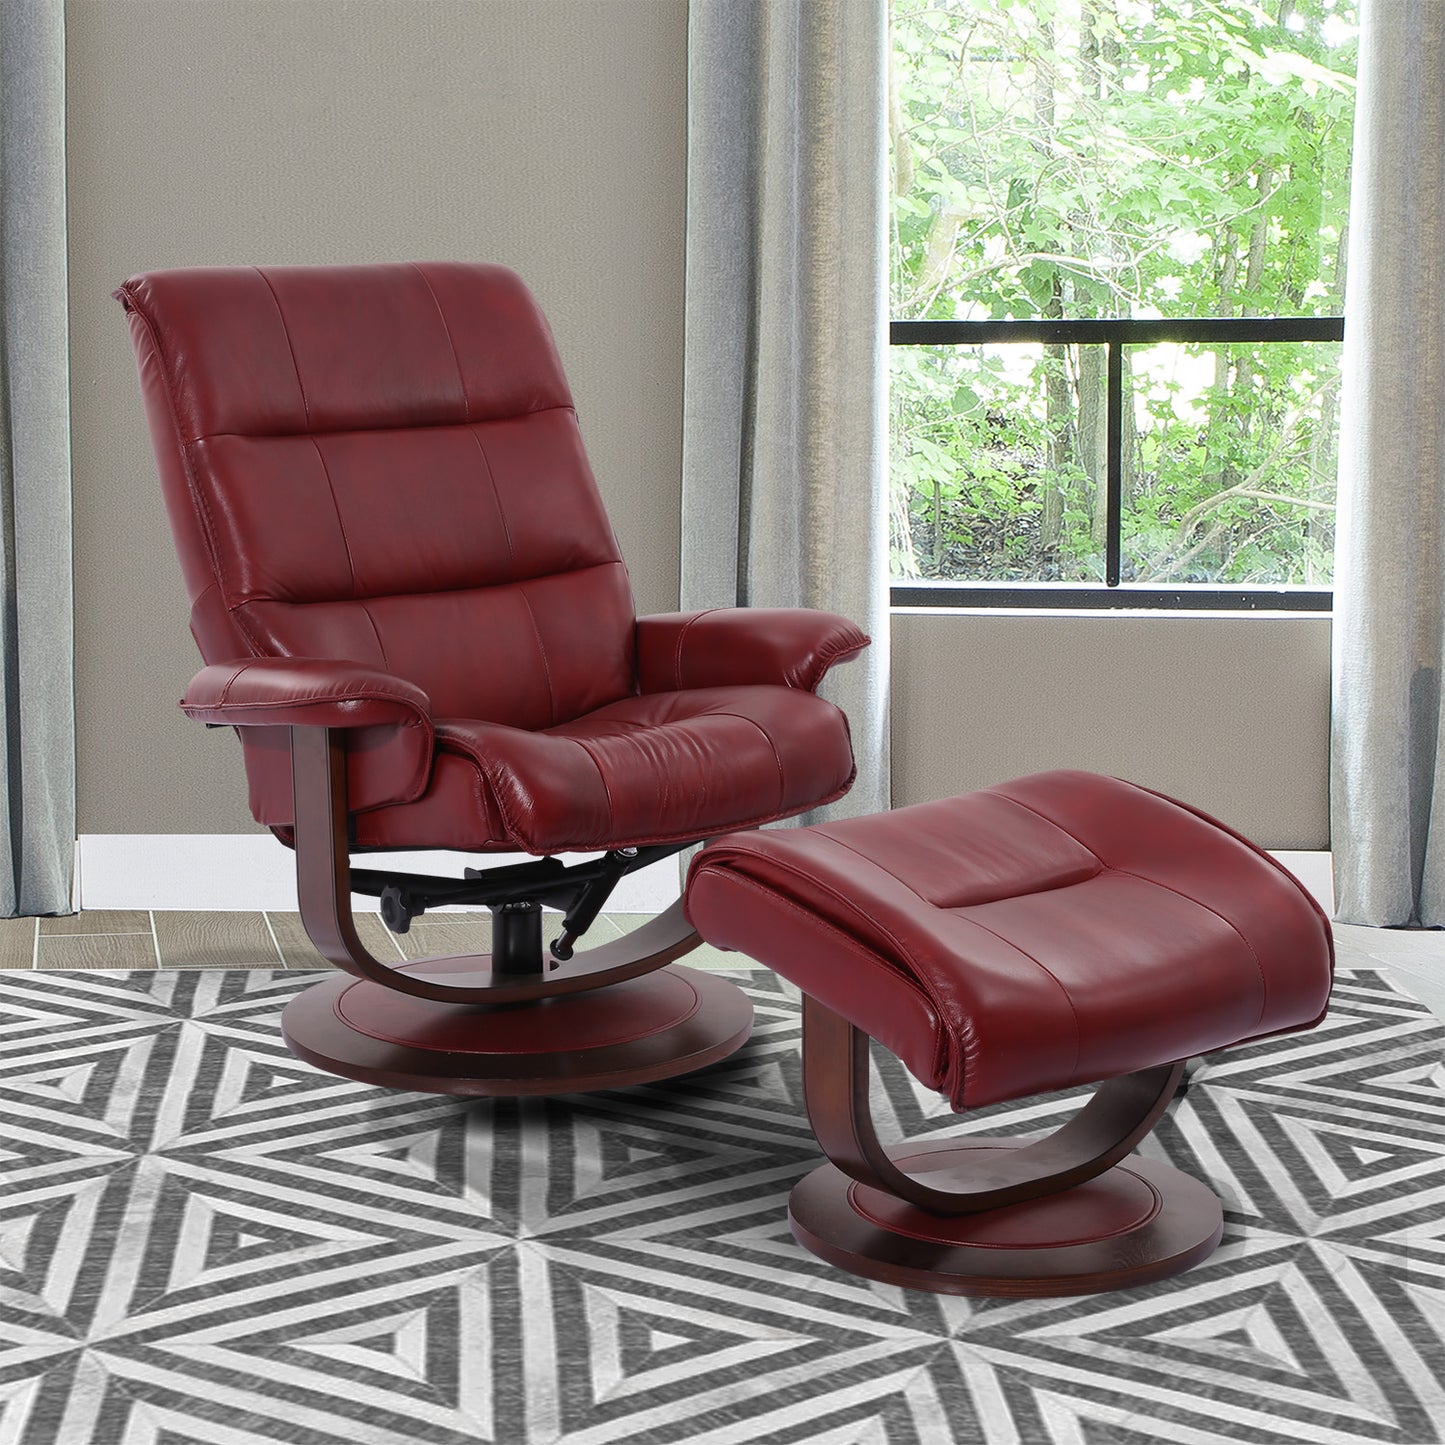 Knight Ice Grey Reclining Chair and Ottoman